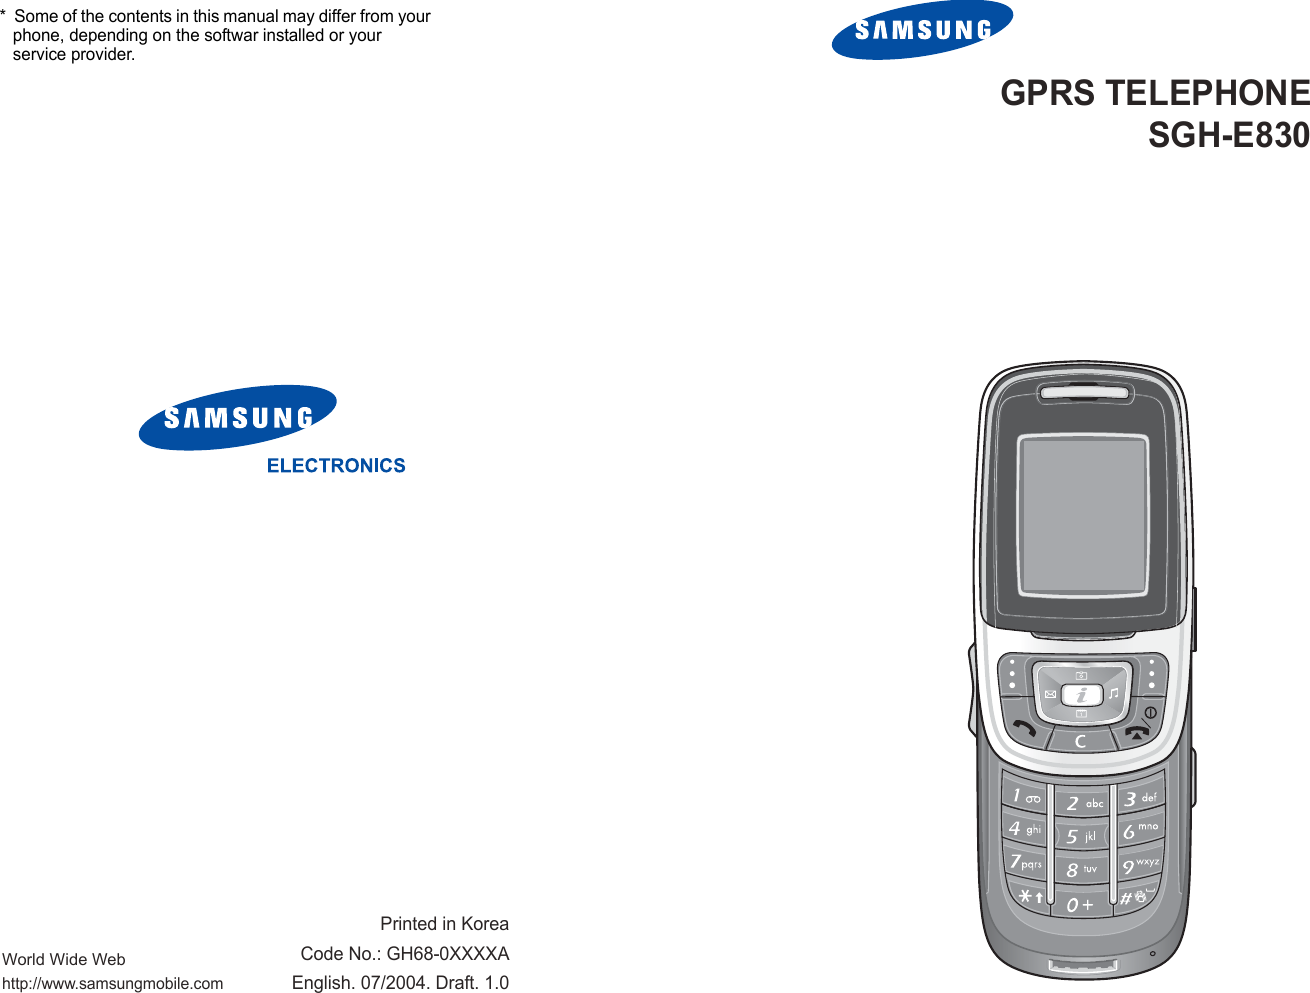 World Wide Webhttp://www.samsungmobile.comPrinted in KoreaCode No.: GH68-0XXXXAEnglish. 07/2004. Draft. 1.0*  Some of the contents in this manual may differ from your phone, depending on the softwar installed or your service provider.GPRS TELEPHONESGH-E830